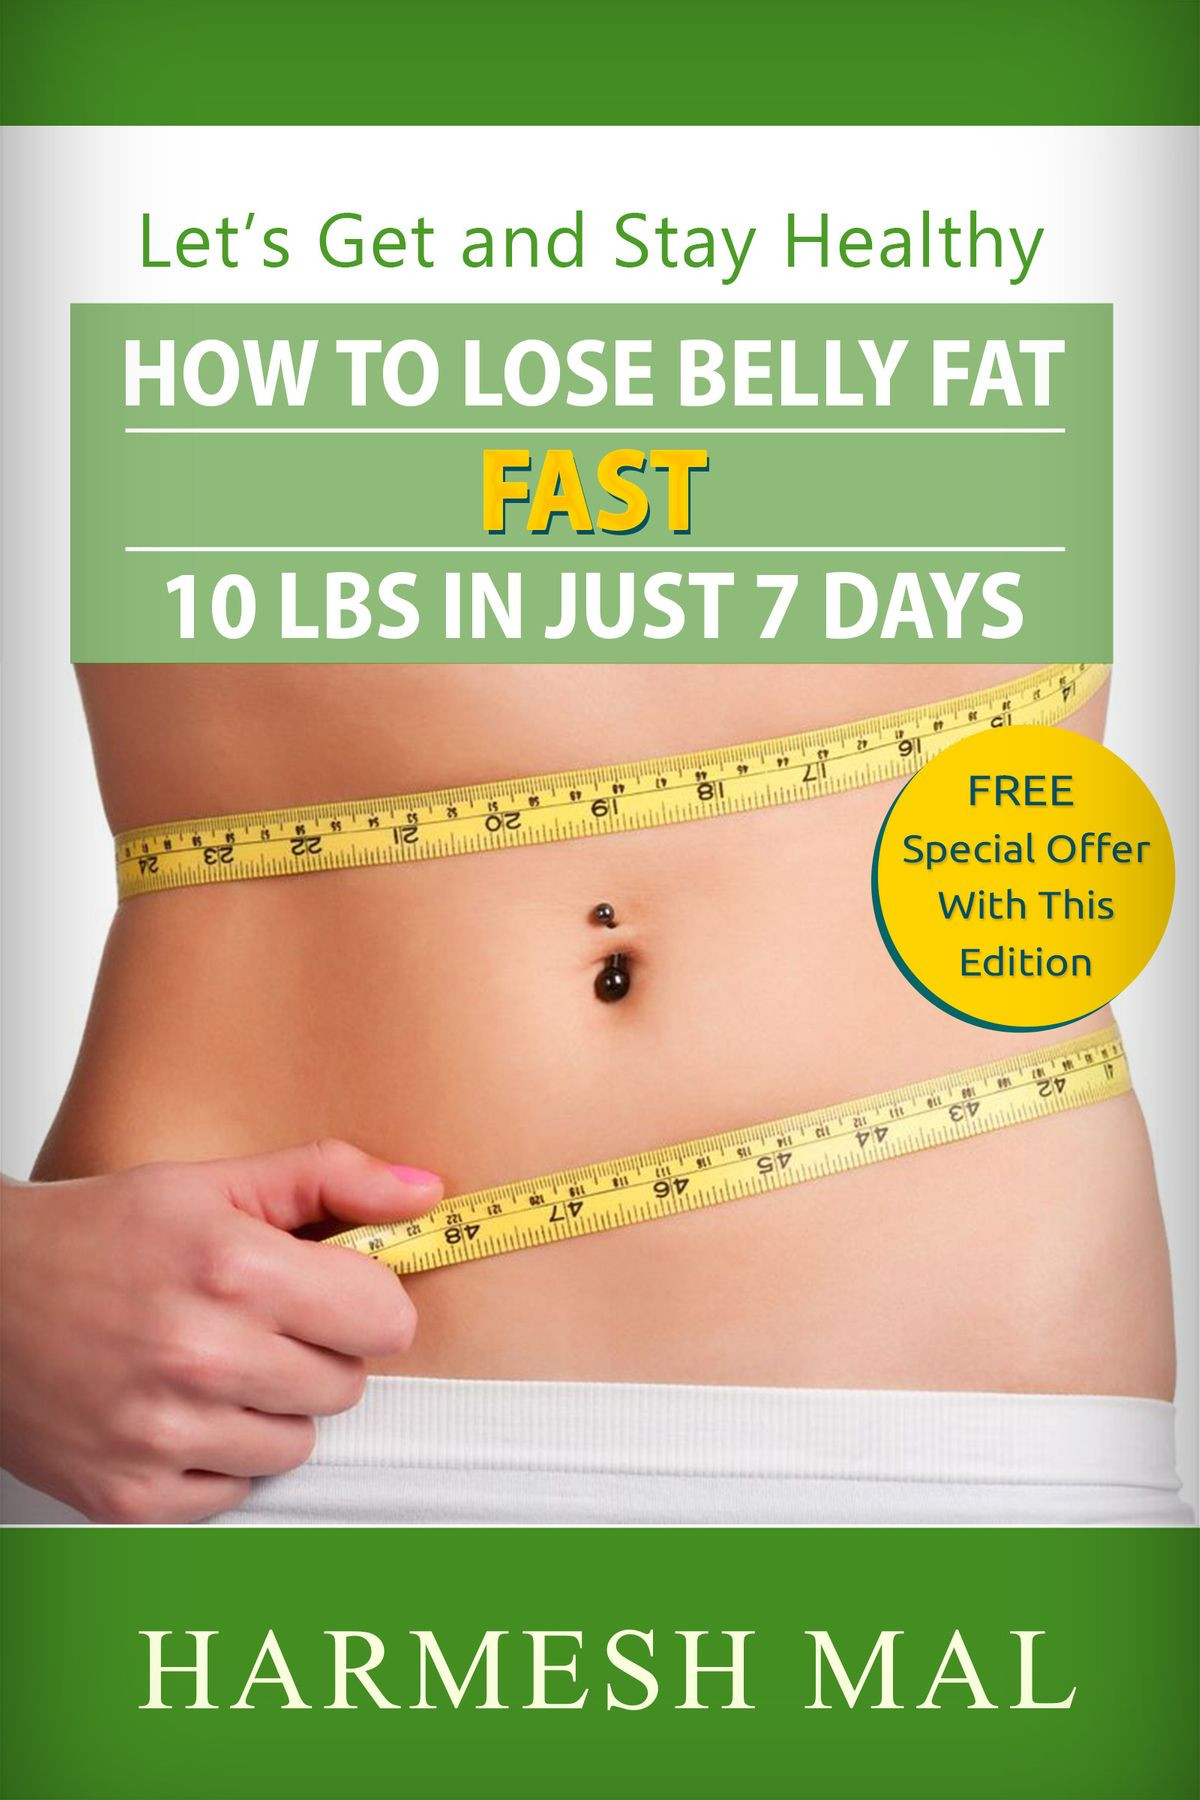 How To Lose Belly Fat In 10 Days
 How To Lose Belly Fat Fast 10 LBS In Just 7 Days eBook by